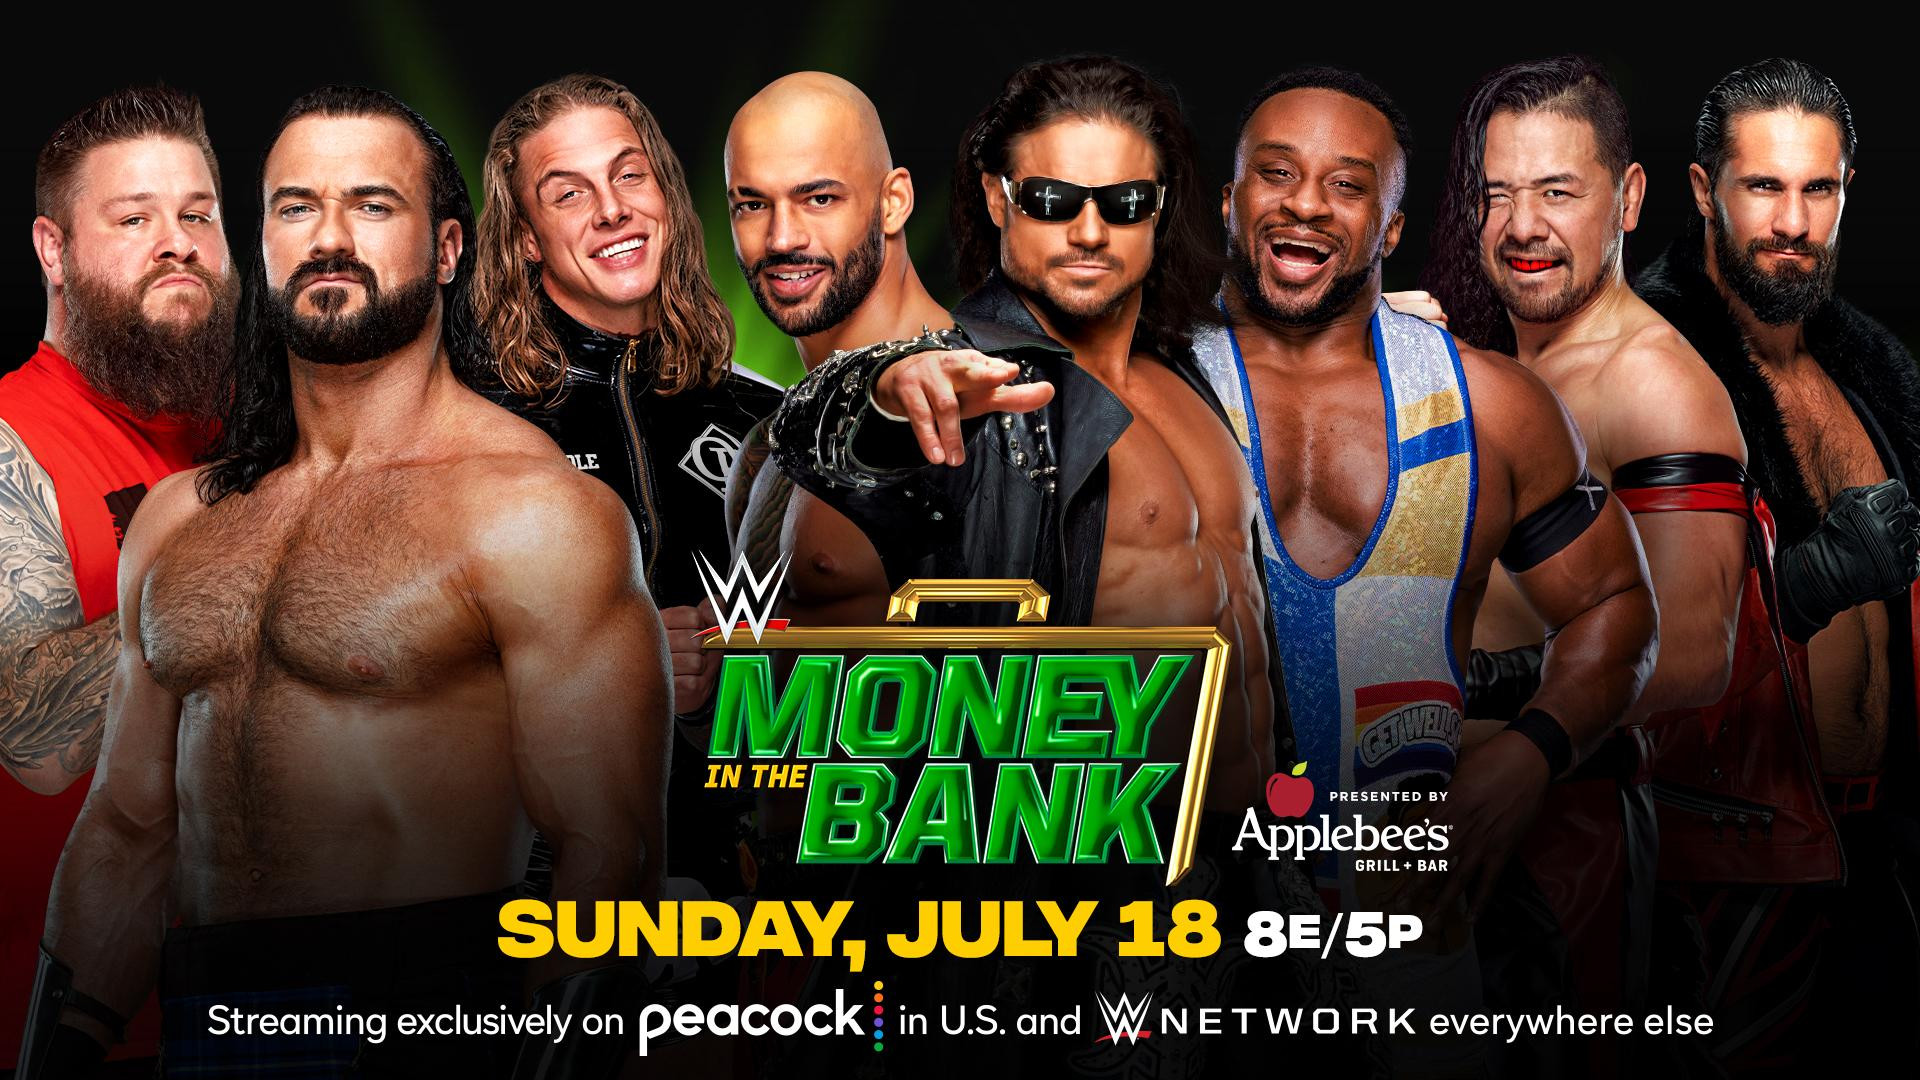 WWE Money In The Bank 2021: UK start time, matches and live stream